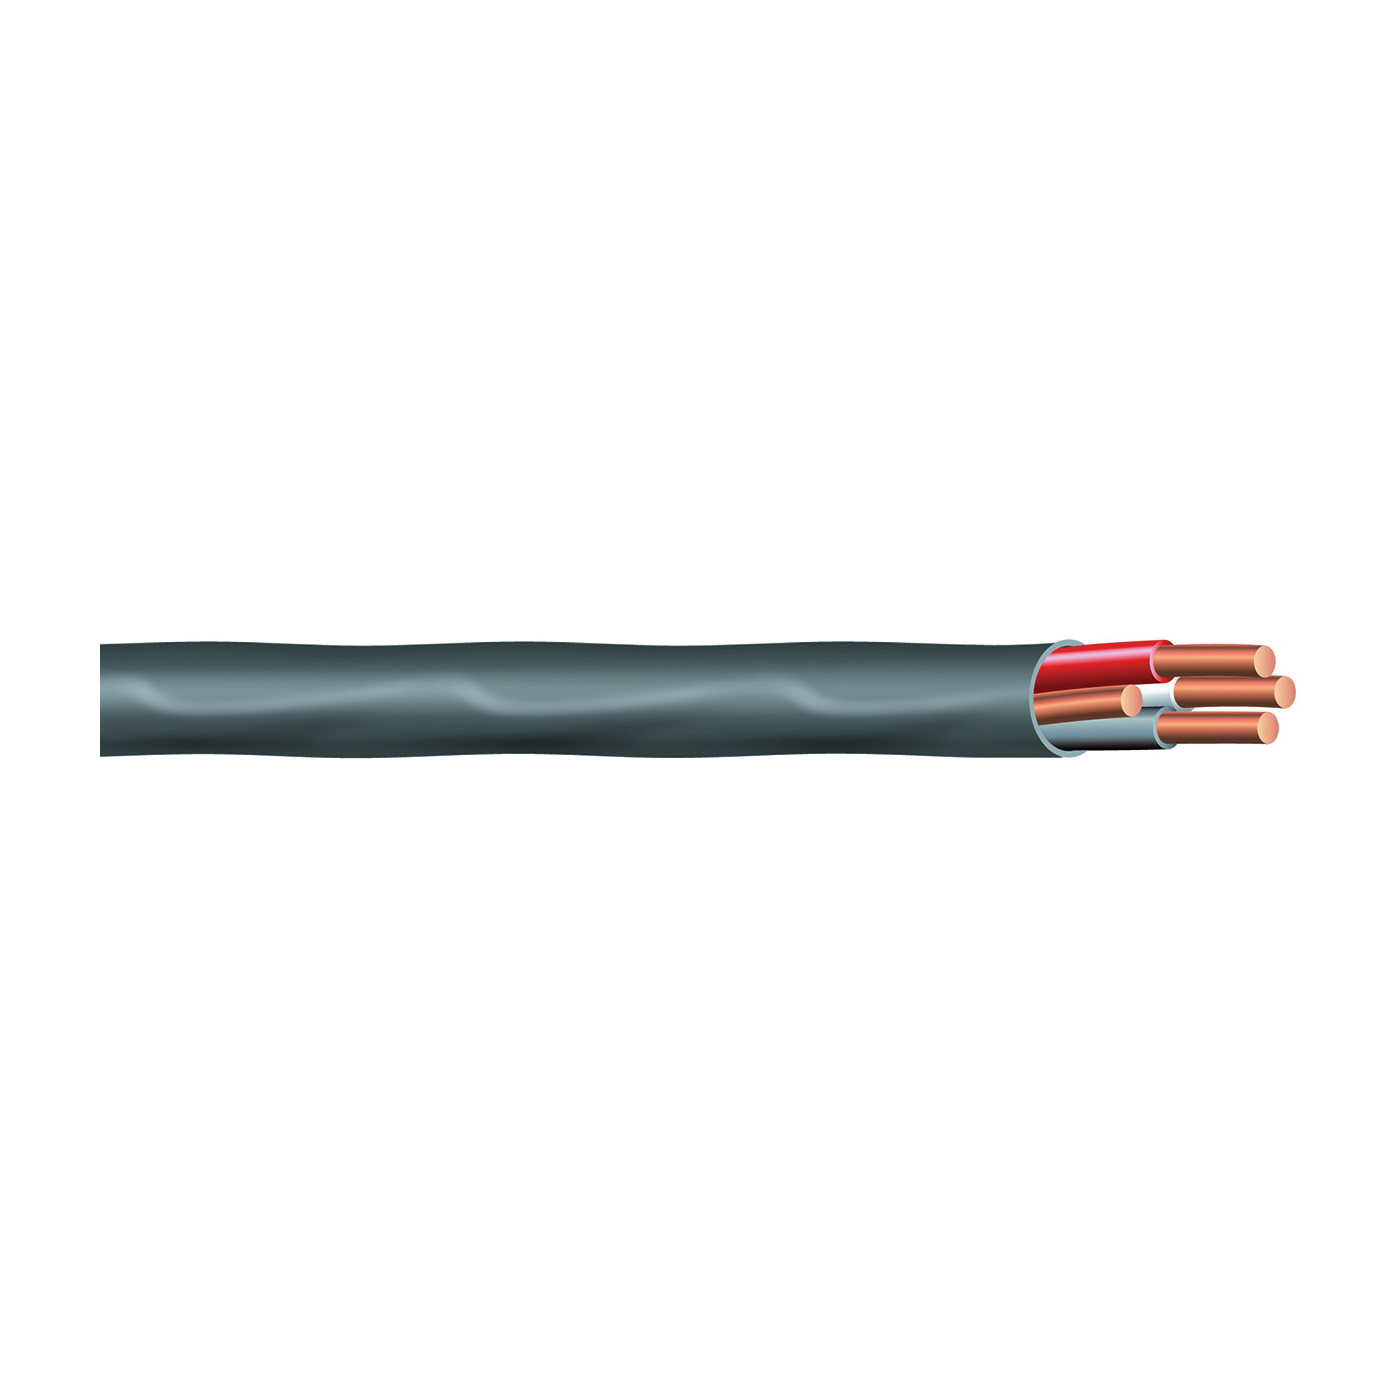 Southwire 63950021 Sheathed Cable, NM-B, 6 AWG Wire, 3 -Conductor, 25 ft L, Copper Conductor, PVC Insulation